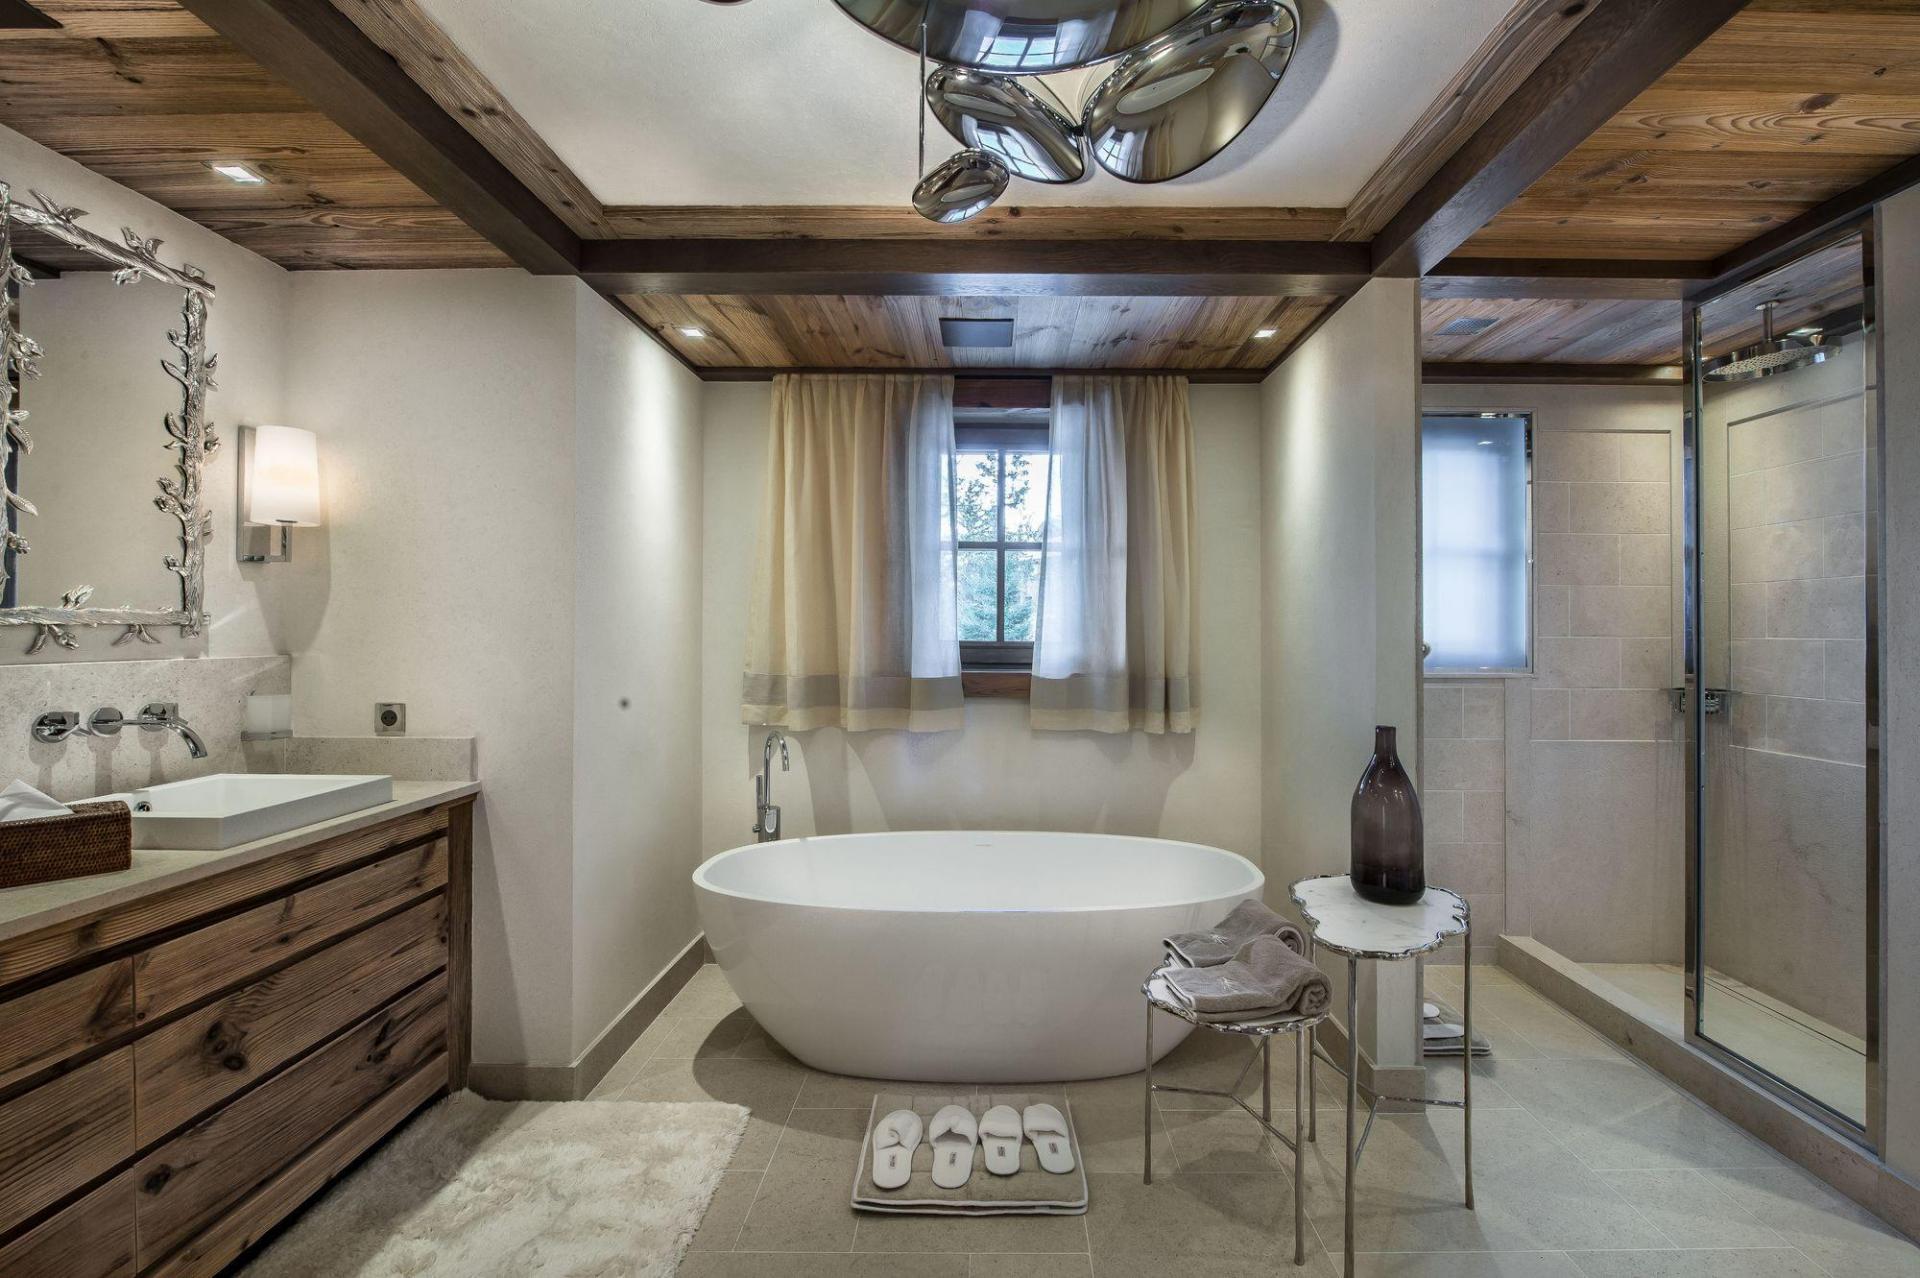 ONE OF THE BEAUTIFUL BATHROOMS IN CHALET DES CHENUS IN THE FRENCH ALPS